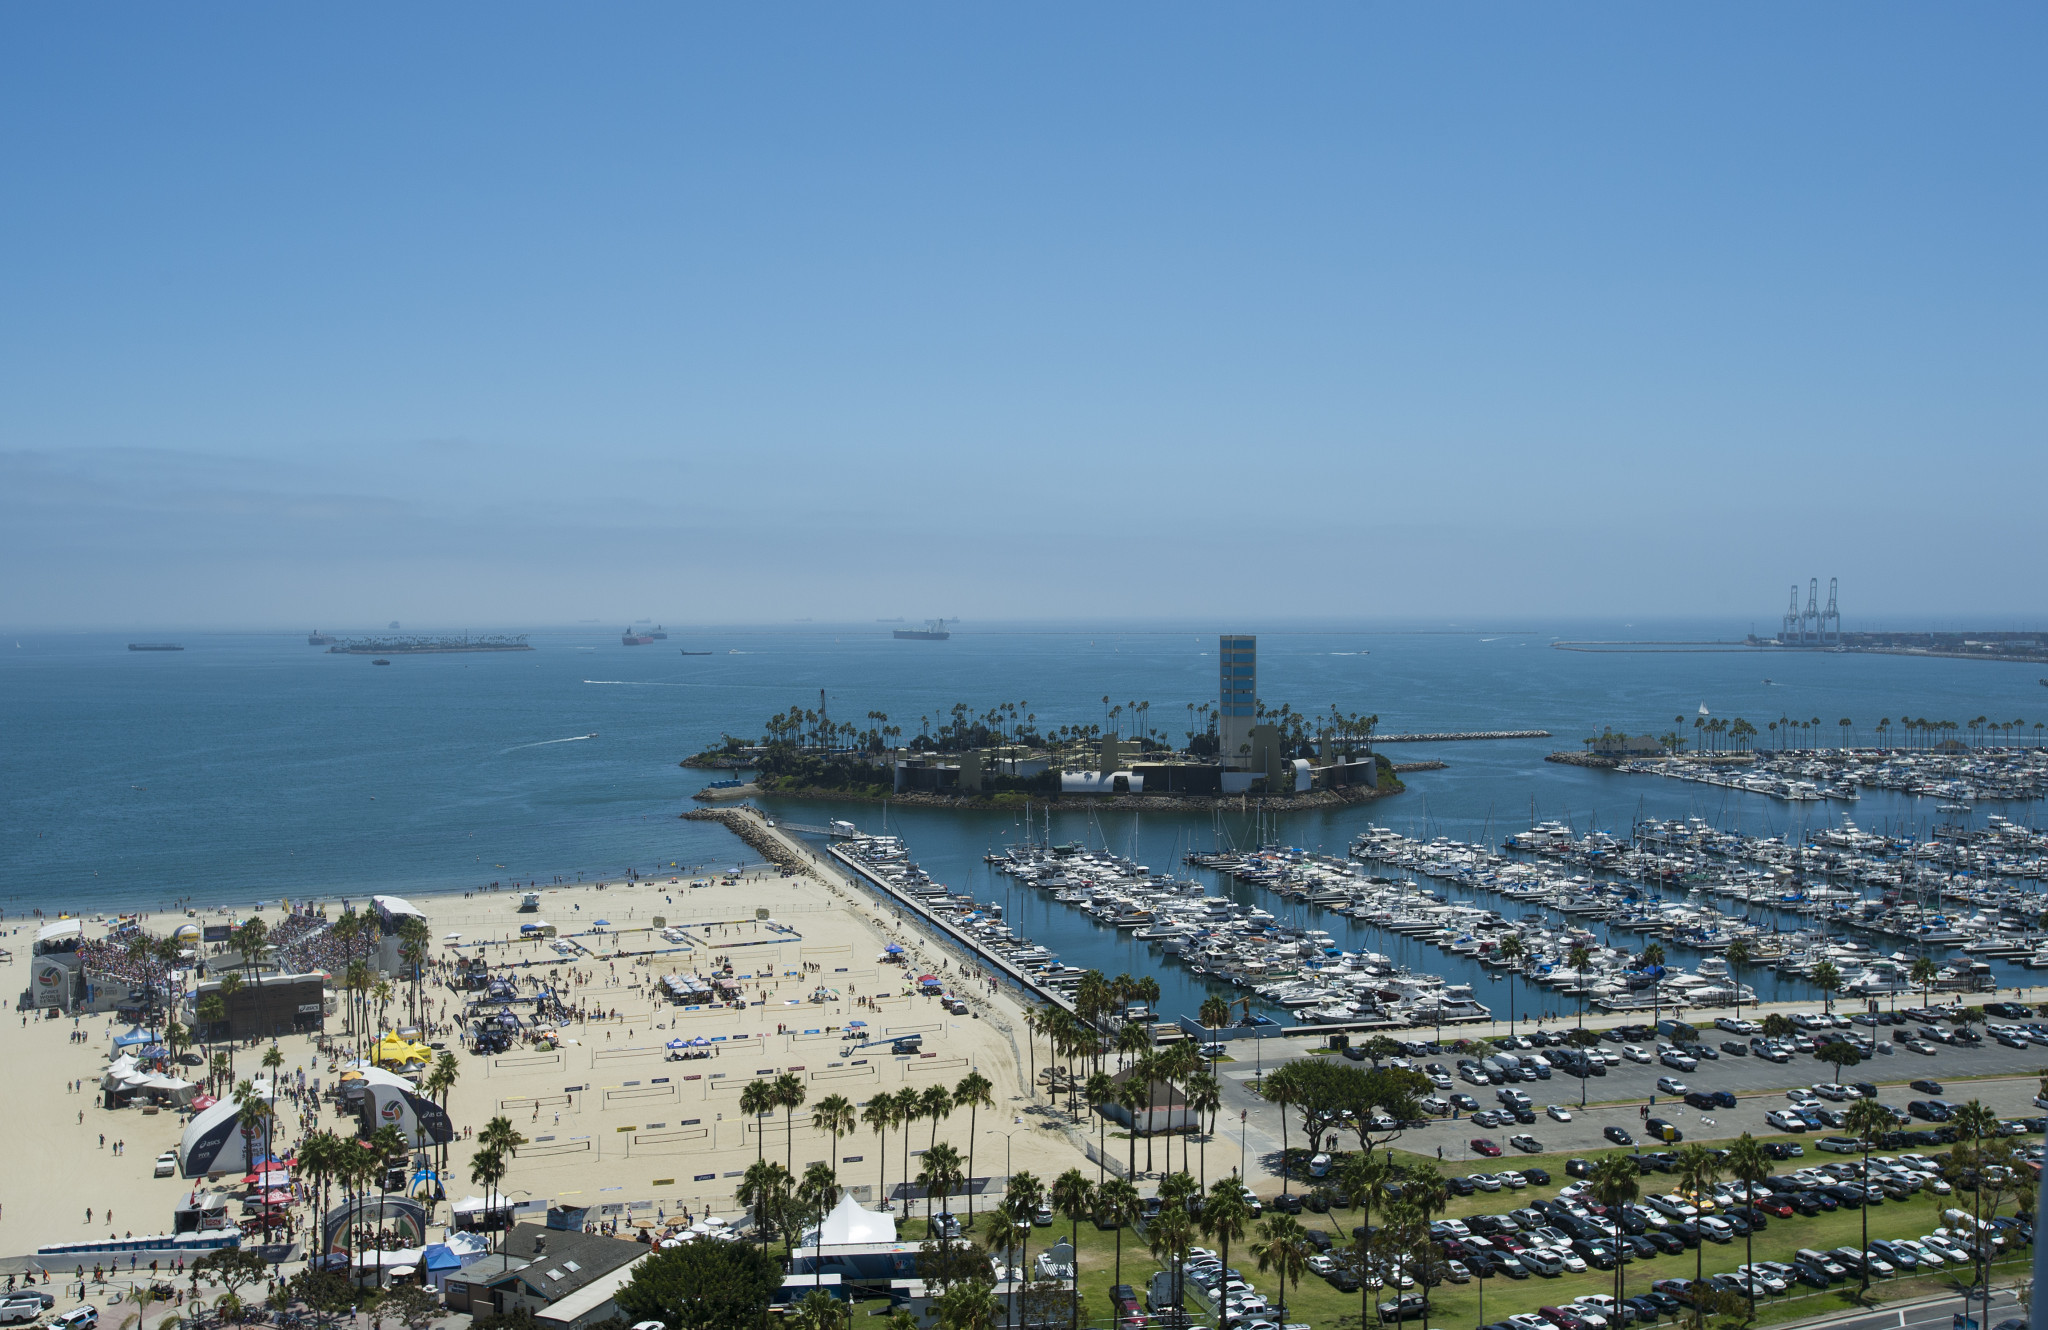 Alamitos Beach will host the USA Triathlon Paratriathlon National Championships, which is also expected to stage triathlon at the Los 2028 Olympic and Paralympic Games ©Getty Images